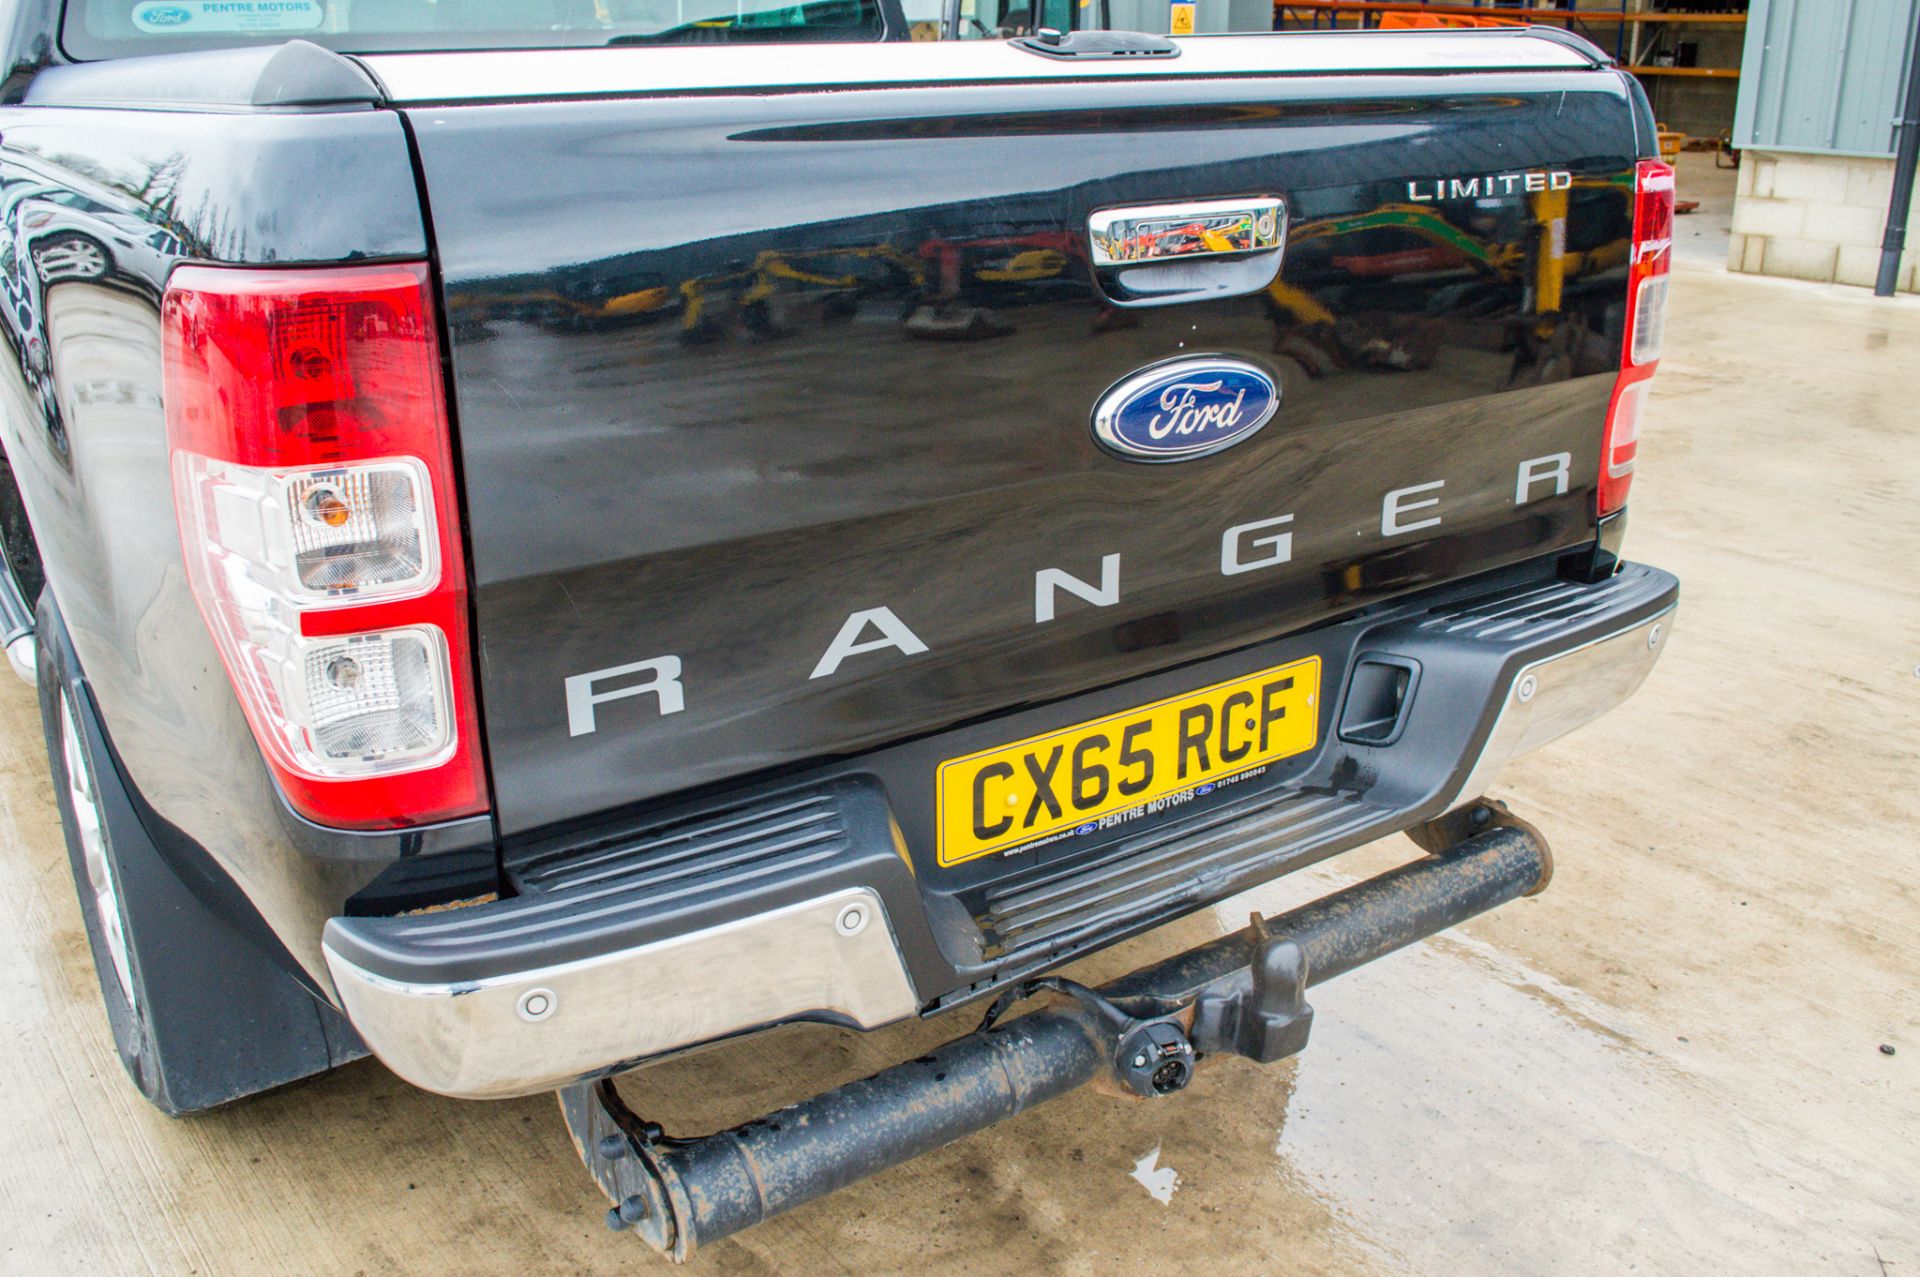 Ford Ranger 2.2 TDCI 150 Limited 4wd automatic double cab pick up - Image 12 of 28